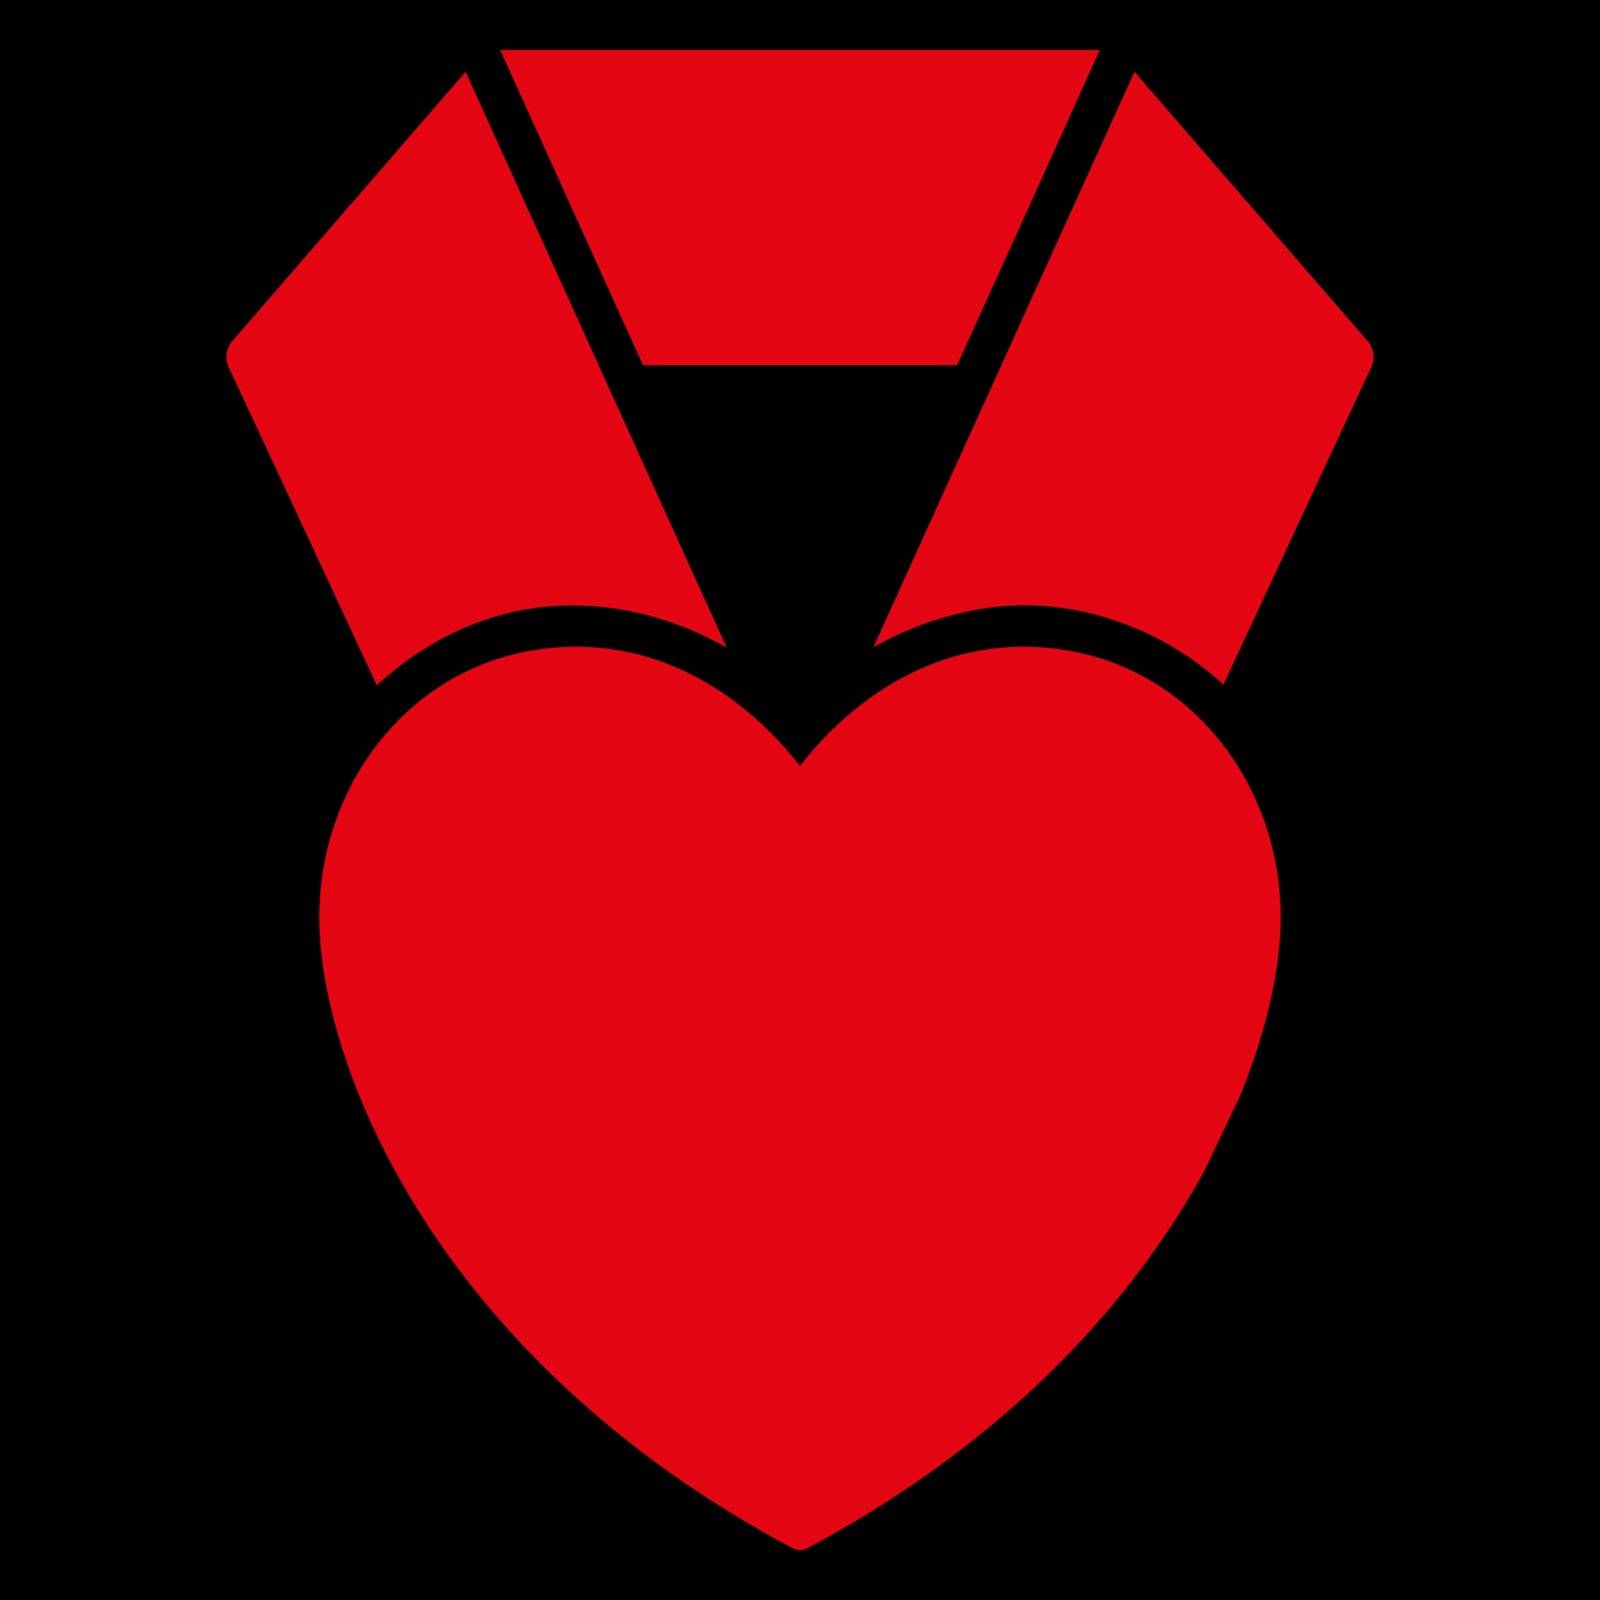 Heart Award vector icon. Style is flat symbol, red color, rounded angles, black background.